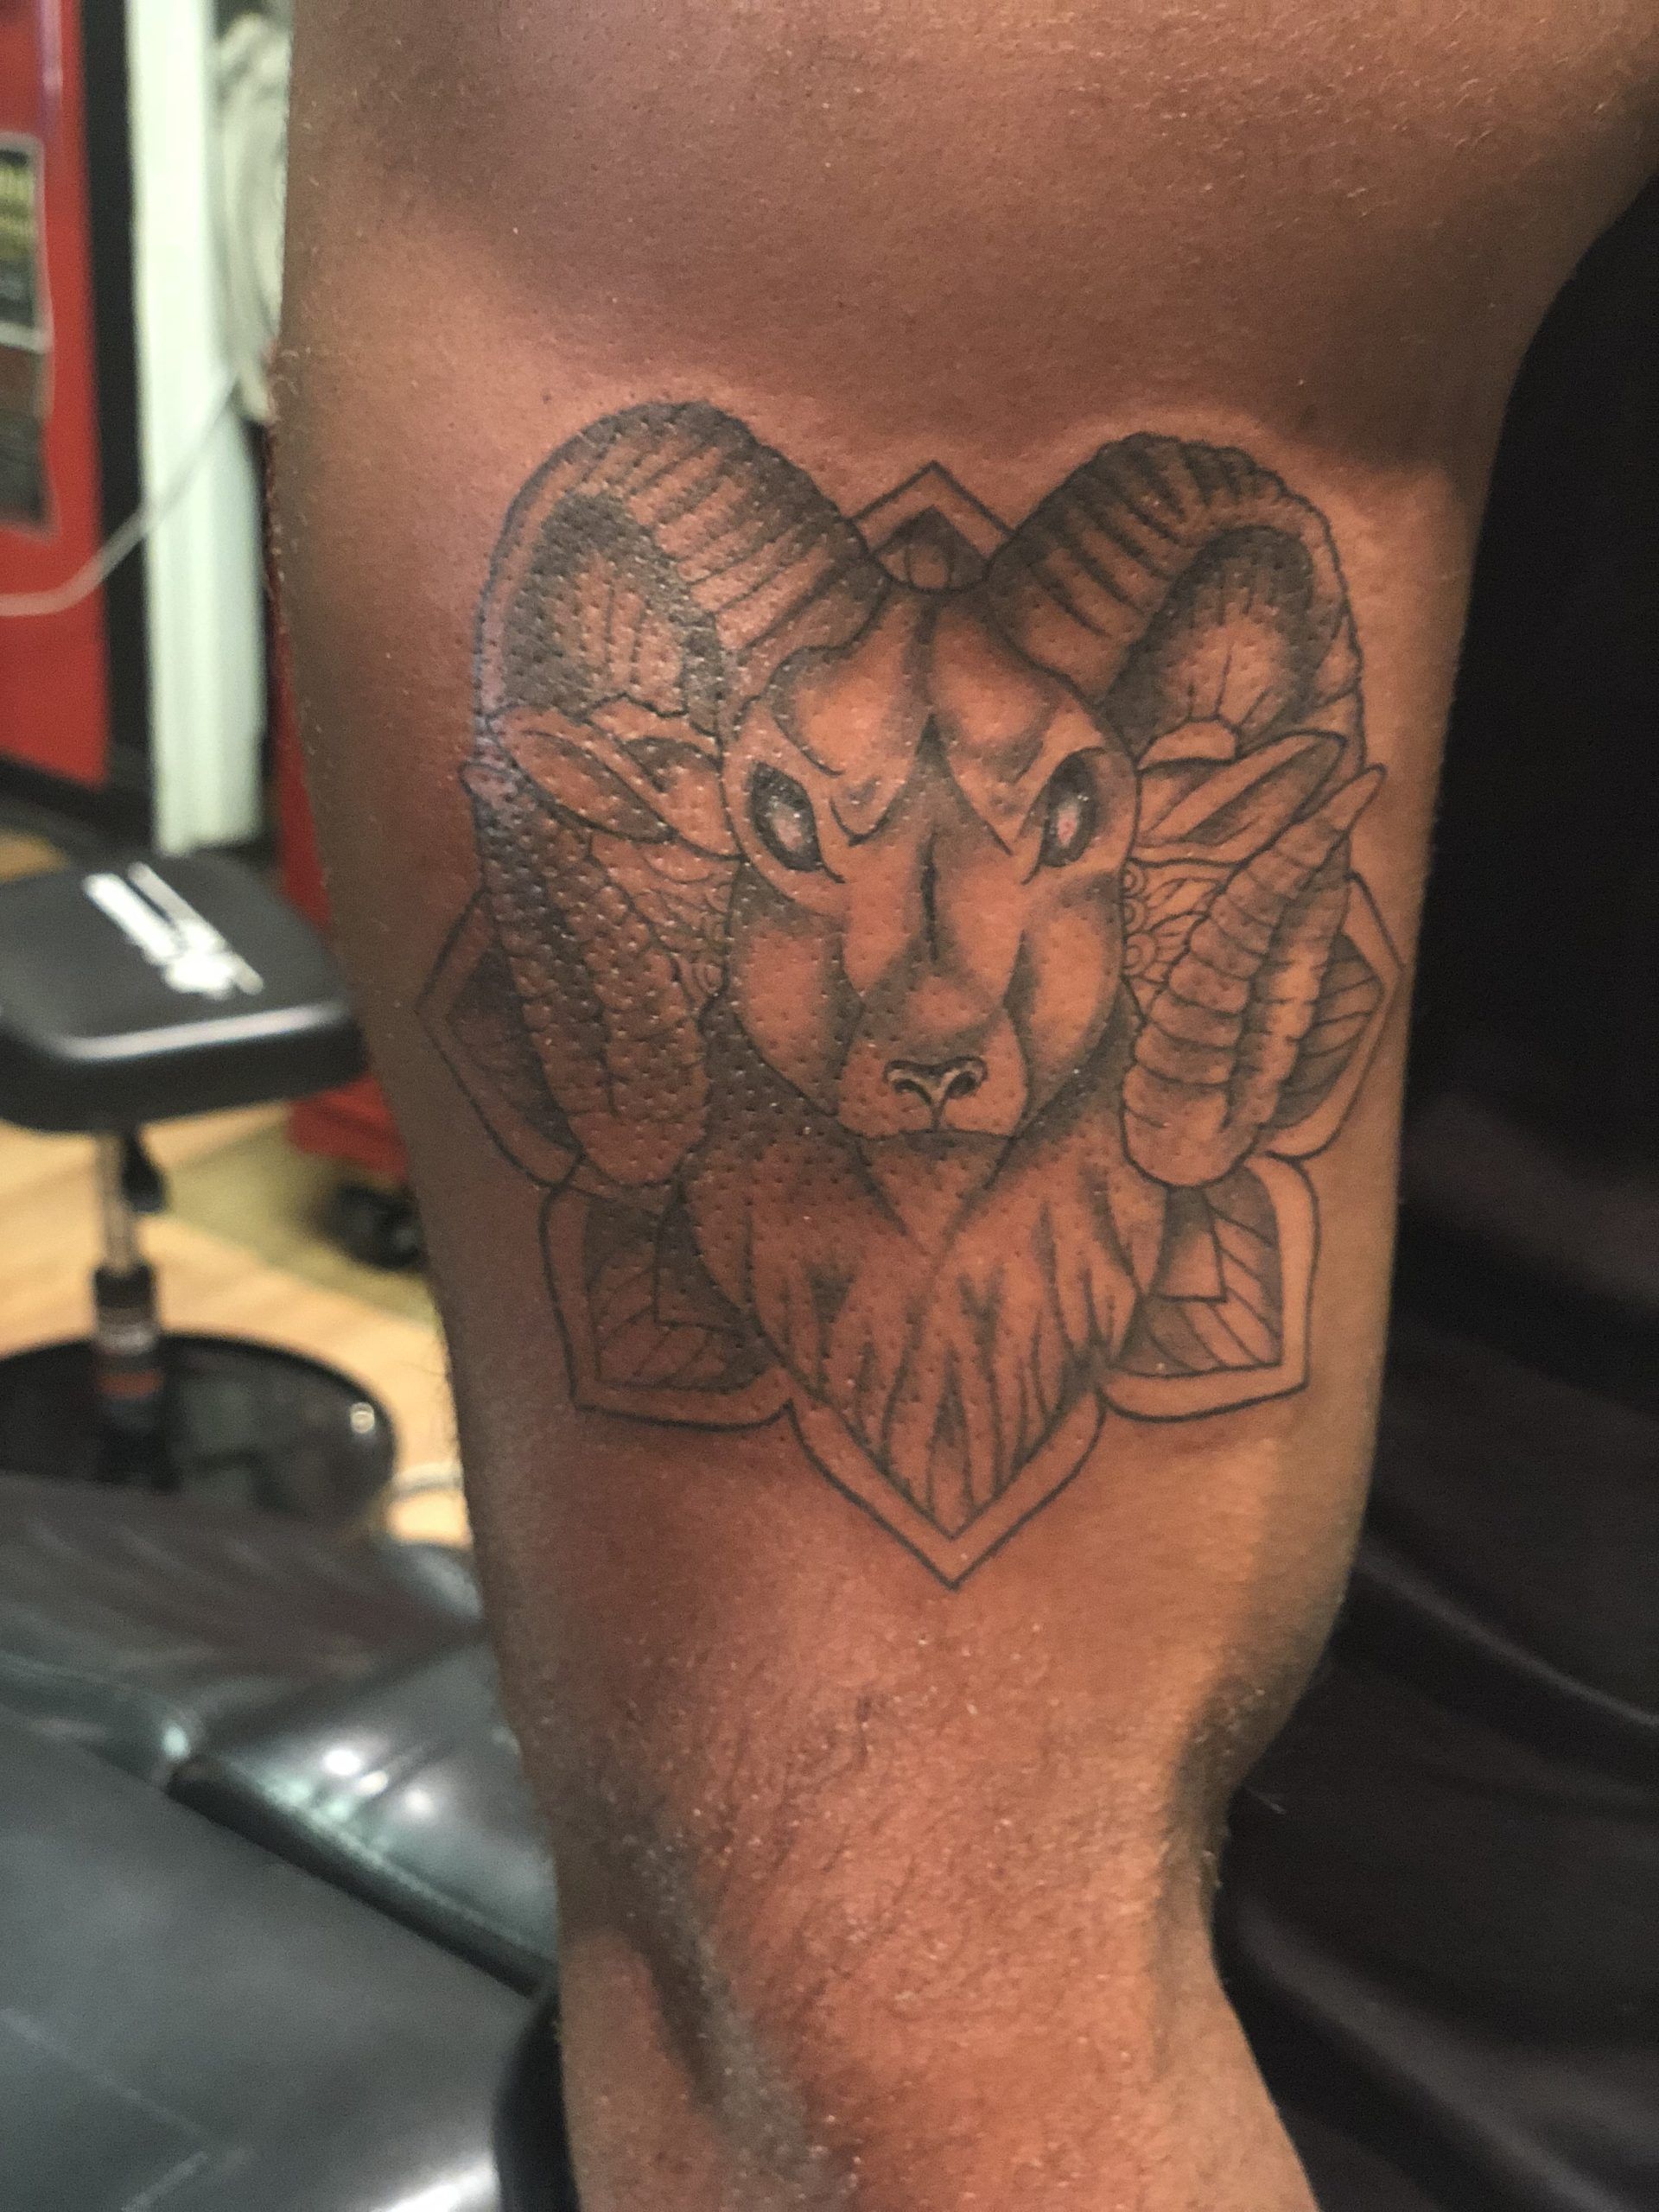 Aries Tattoo- Noida - 𝑪𝒖𝒔𝒕𝒐𝒎 𝑳𝒆𝒐 𝒁𝒐𝒅𝒊𝒂𝒄 𝑺𝒊𝒈𝒏 𝒘𝒊𝒕𝒉  𝑹𝒐𝒎𝒂𝒏 𝑵𝒖𝒎𝒃𝒆𝒓 ♌🔤 Artists: Vishal (@tattooistvishal ) 👨‍🎨  Design by : Ayaan (@ayaan_7one ) 👨‍🎨 ⠀⠀⠀⠀⠀⠀⠀⠀⠀⠀⠀⠀ 📲Book Your Appointment  or Get Free ...